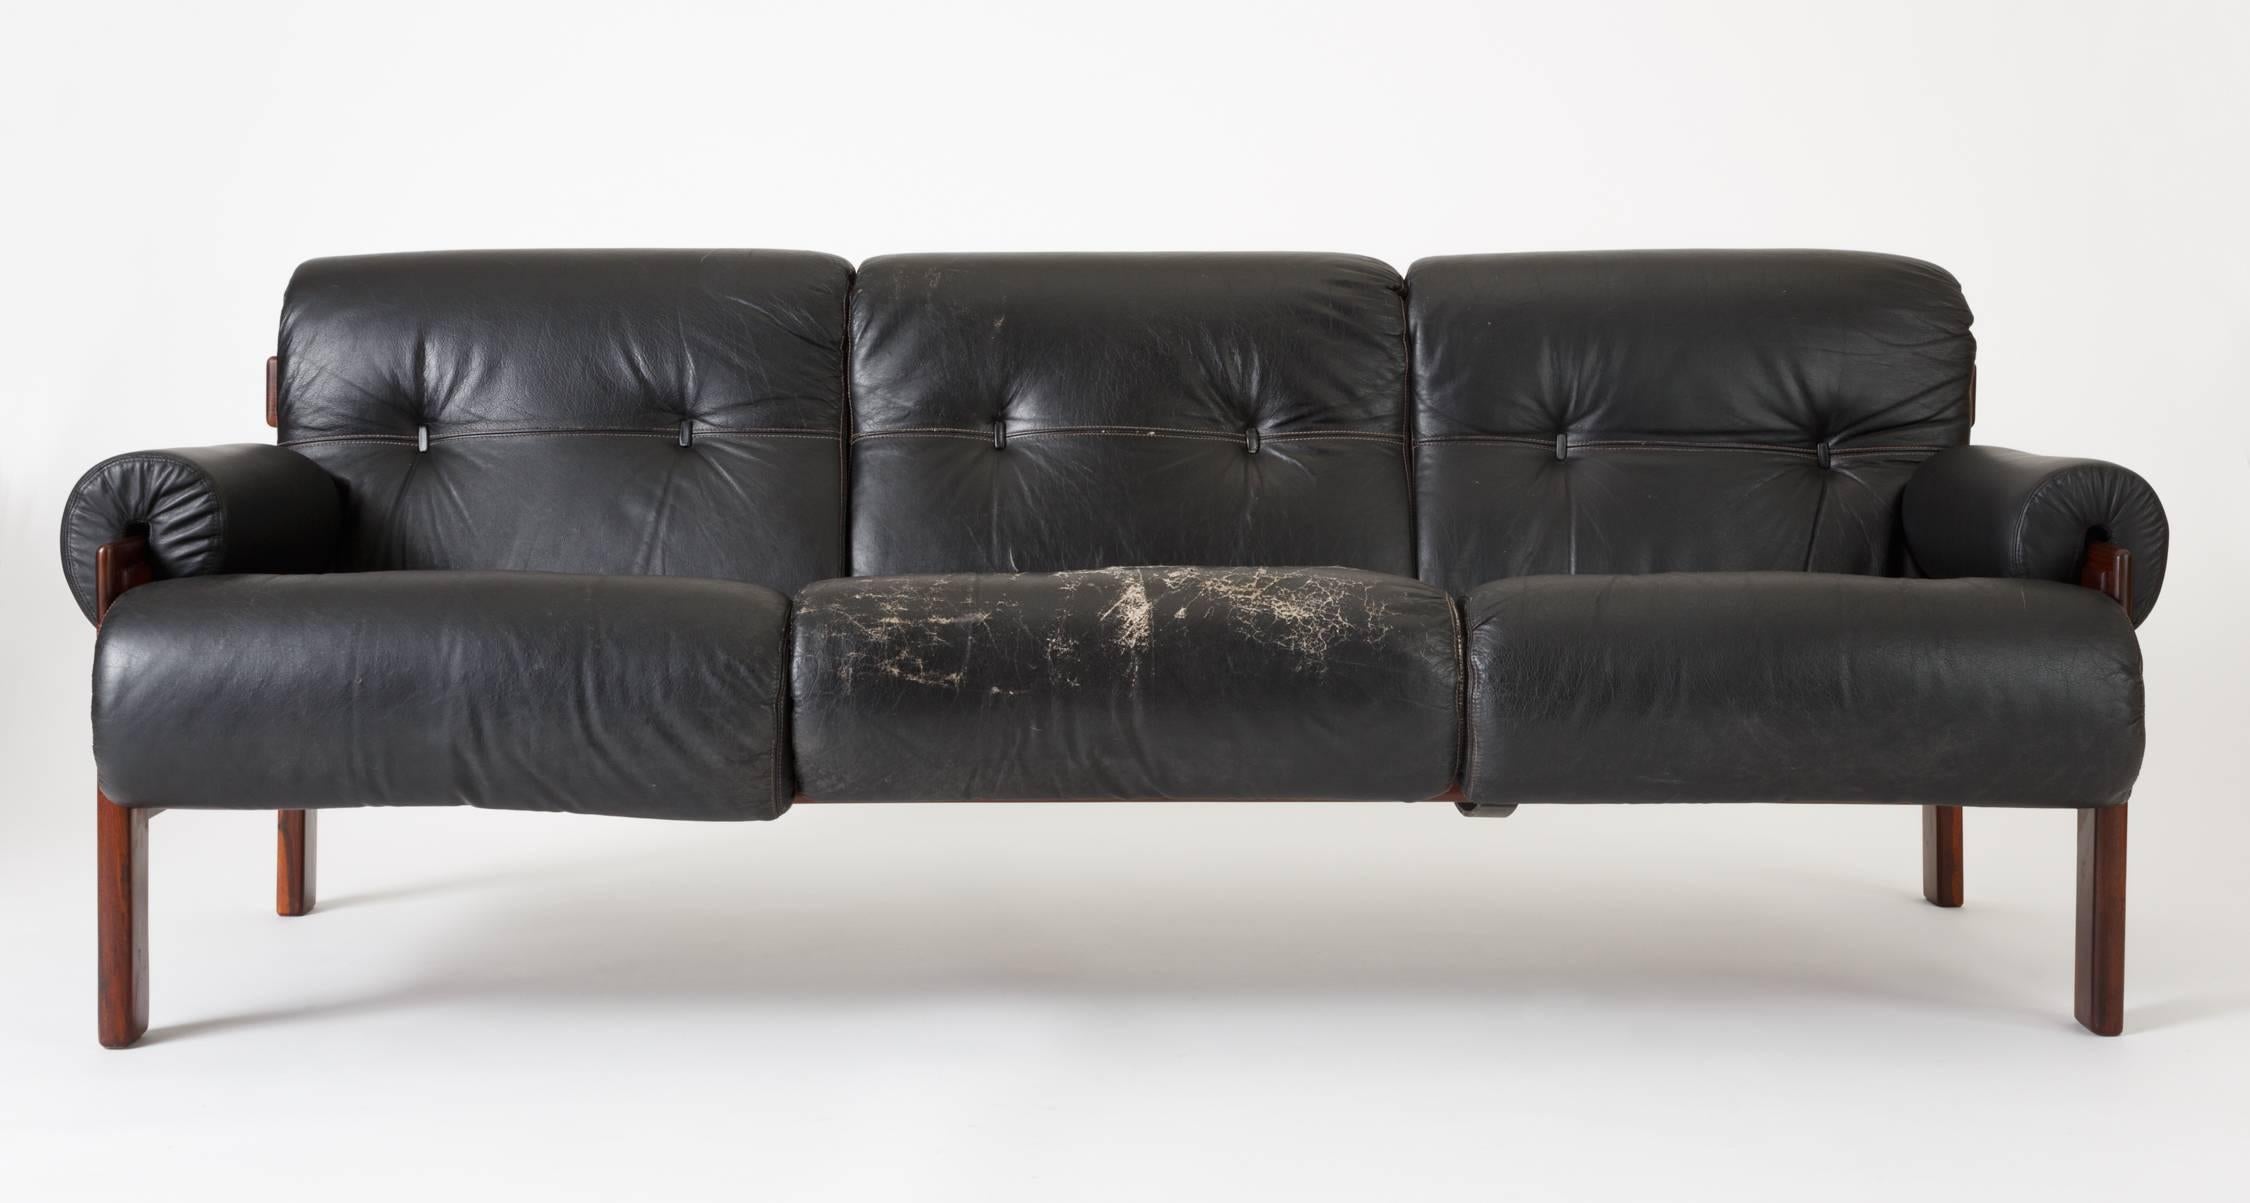 A three-seat sofa by Brazil-based Romanian designer Jean Gillon, produced by Italma in the 1960s. The sofa has a slatted frame of louro prieto wood - a dark tropical laurel with a straight grain pattern, strung with black leather straps. The